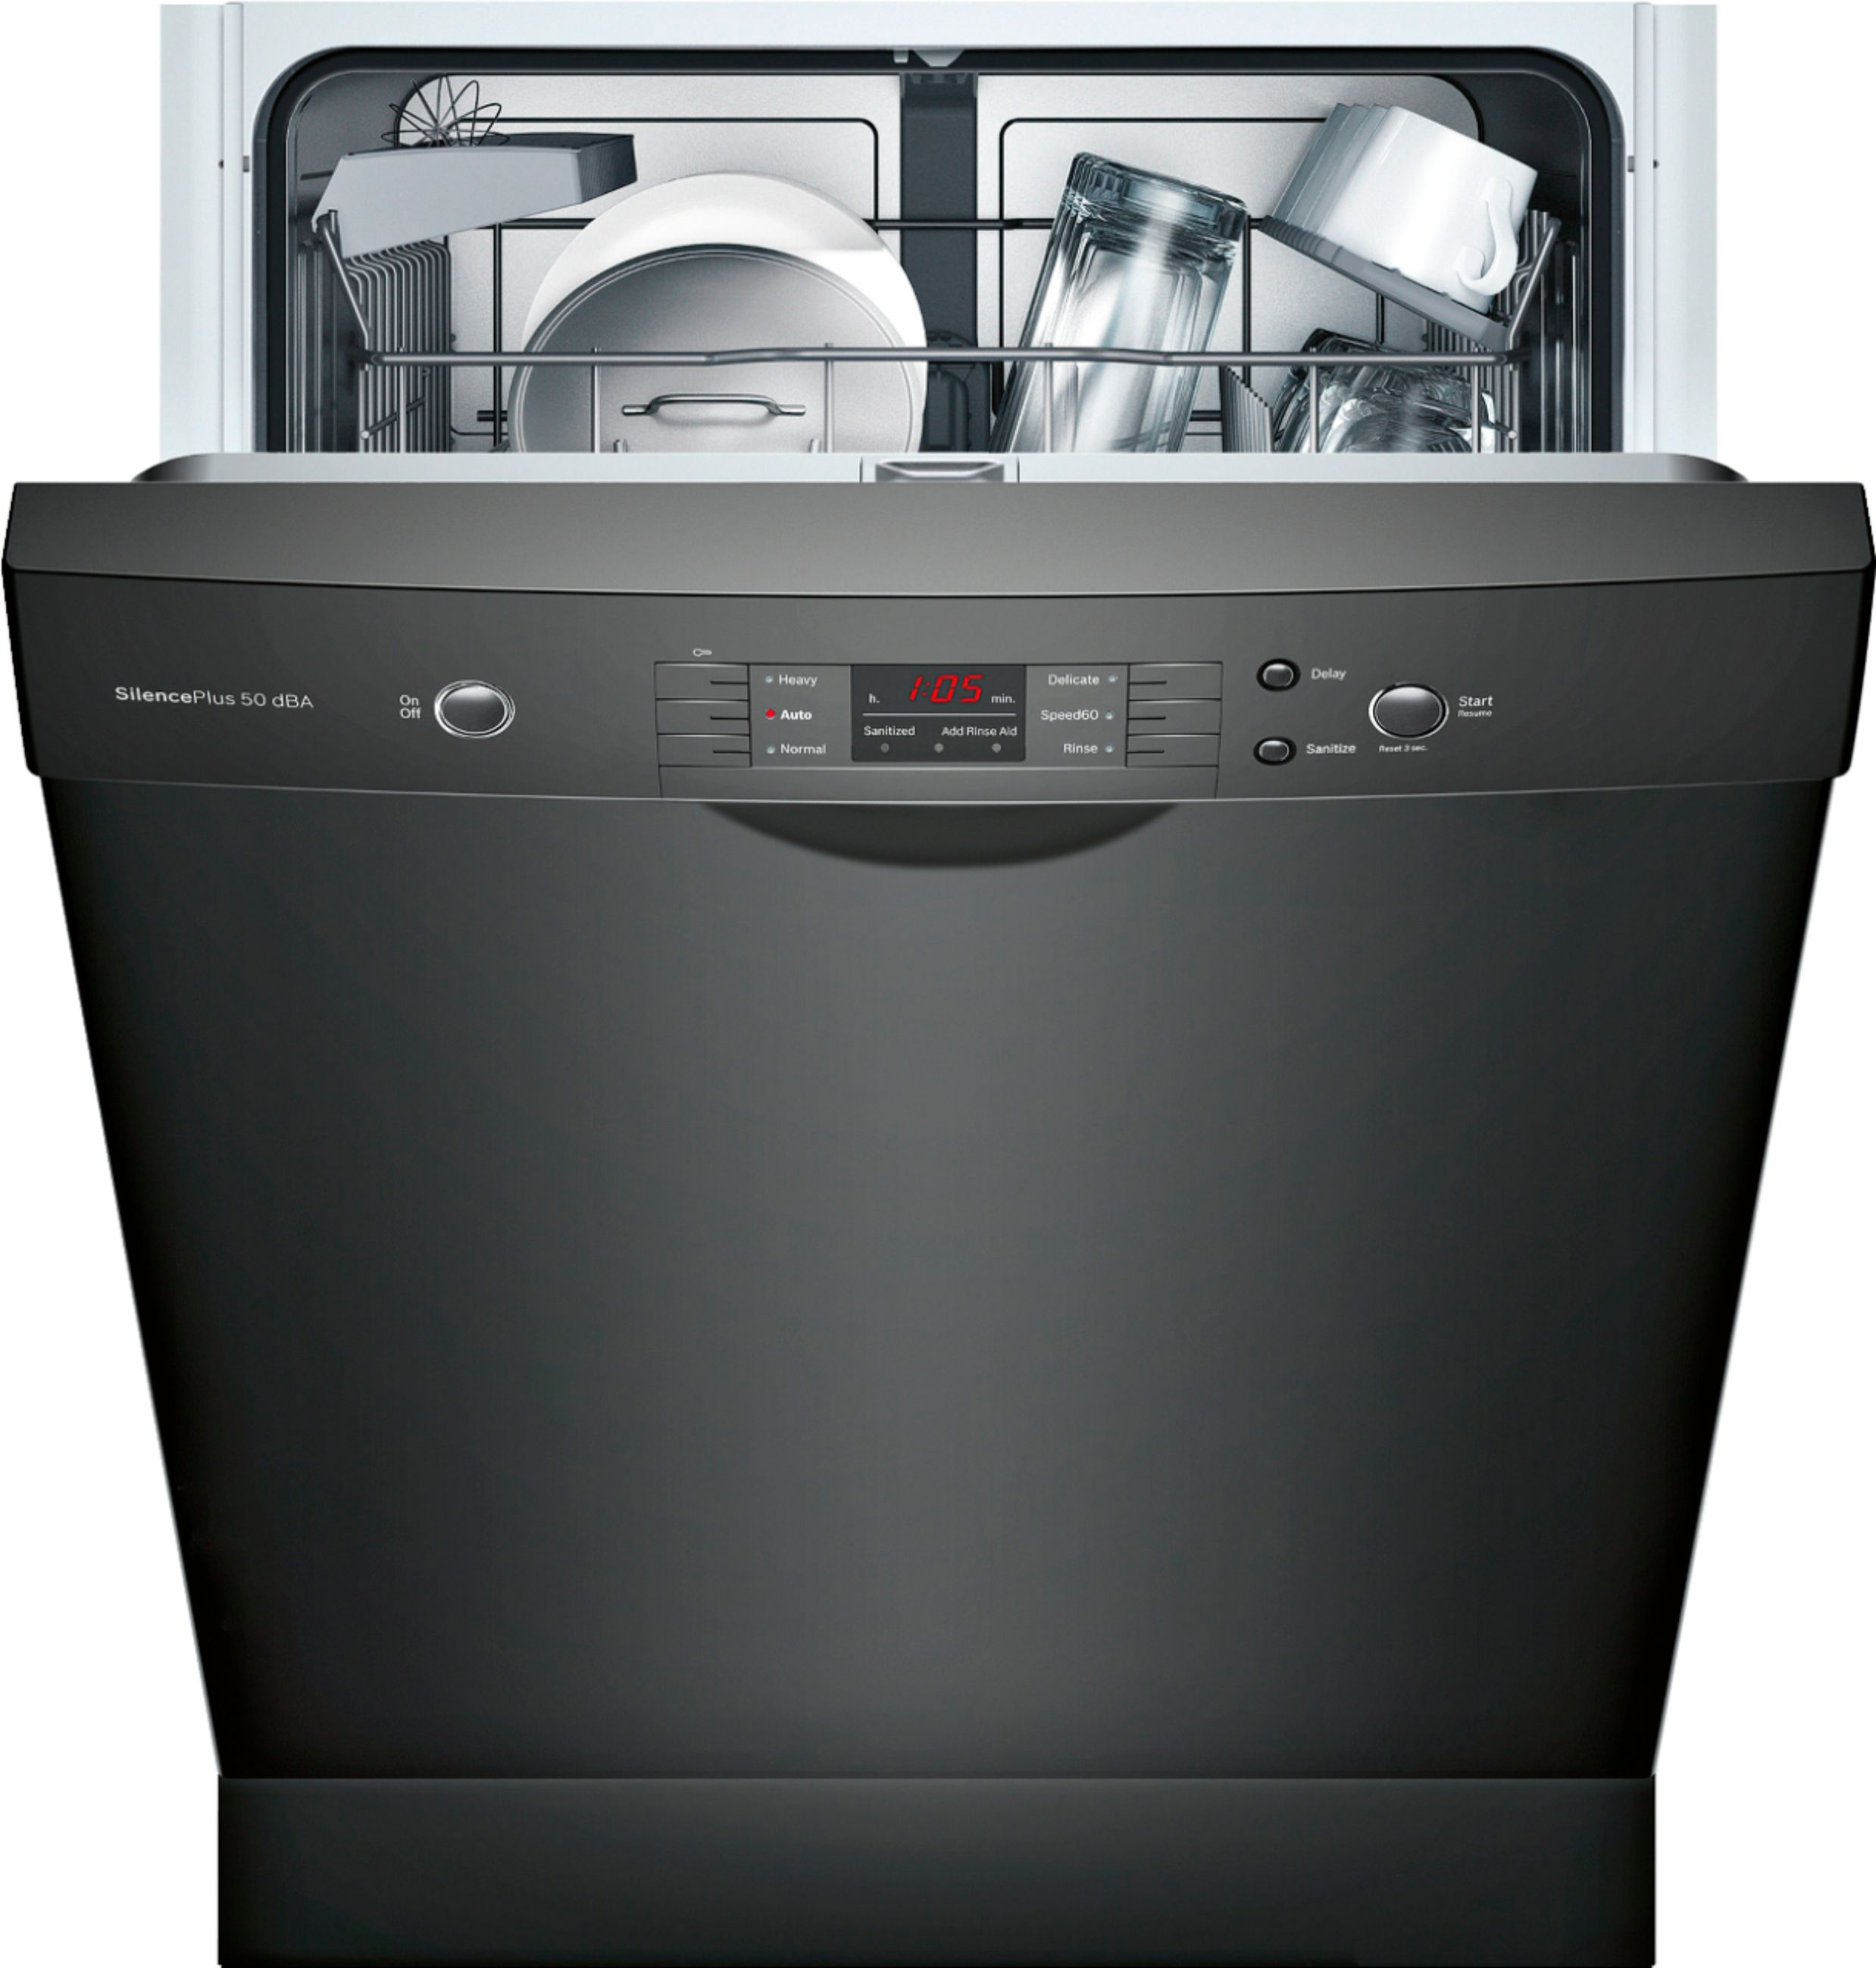 Bosch 100 Series 24" Front Control BuiltIn Dishwasher with Stainless